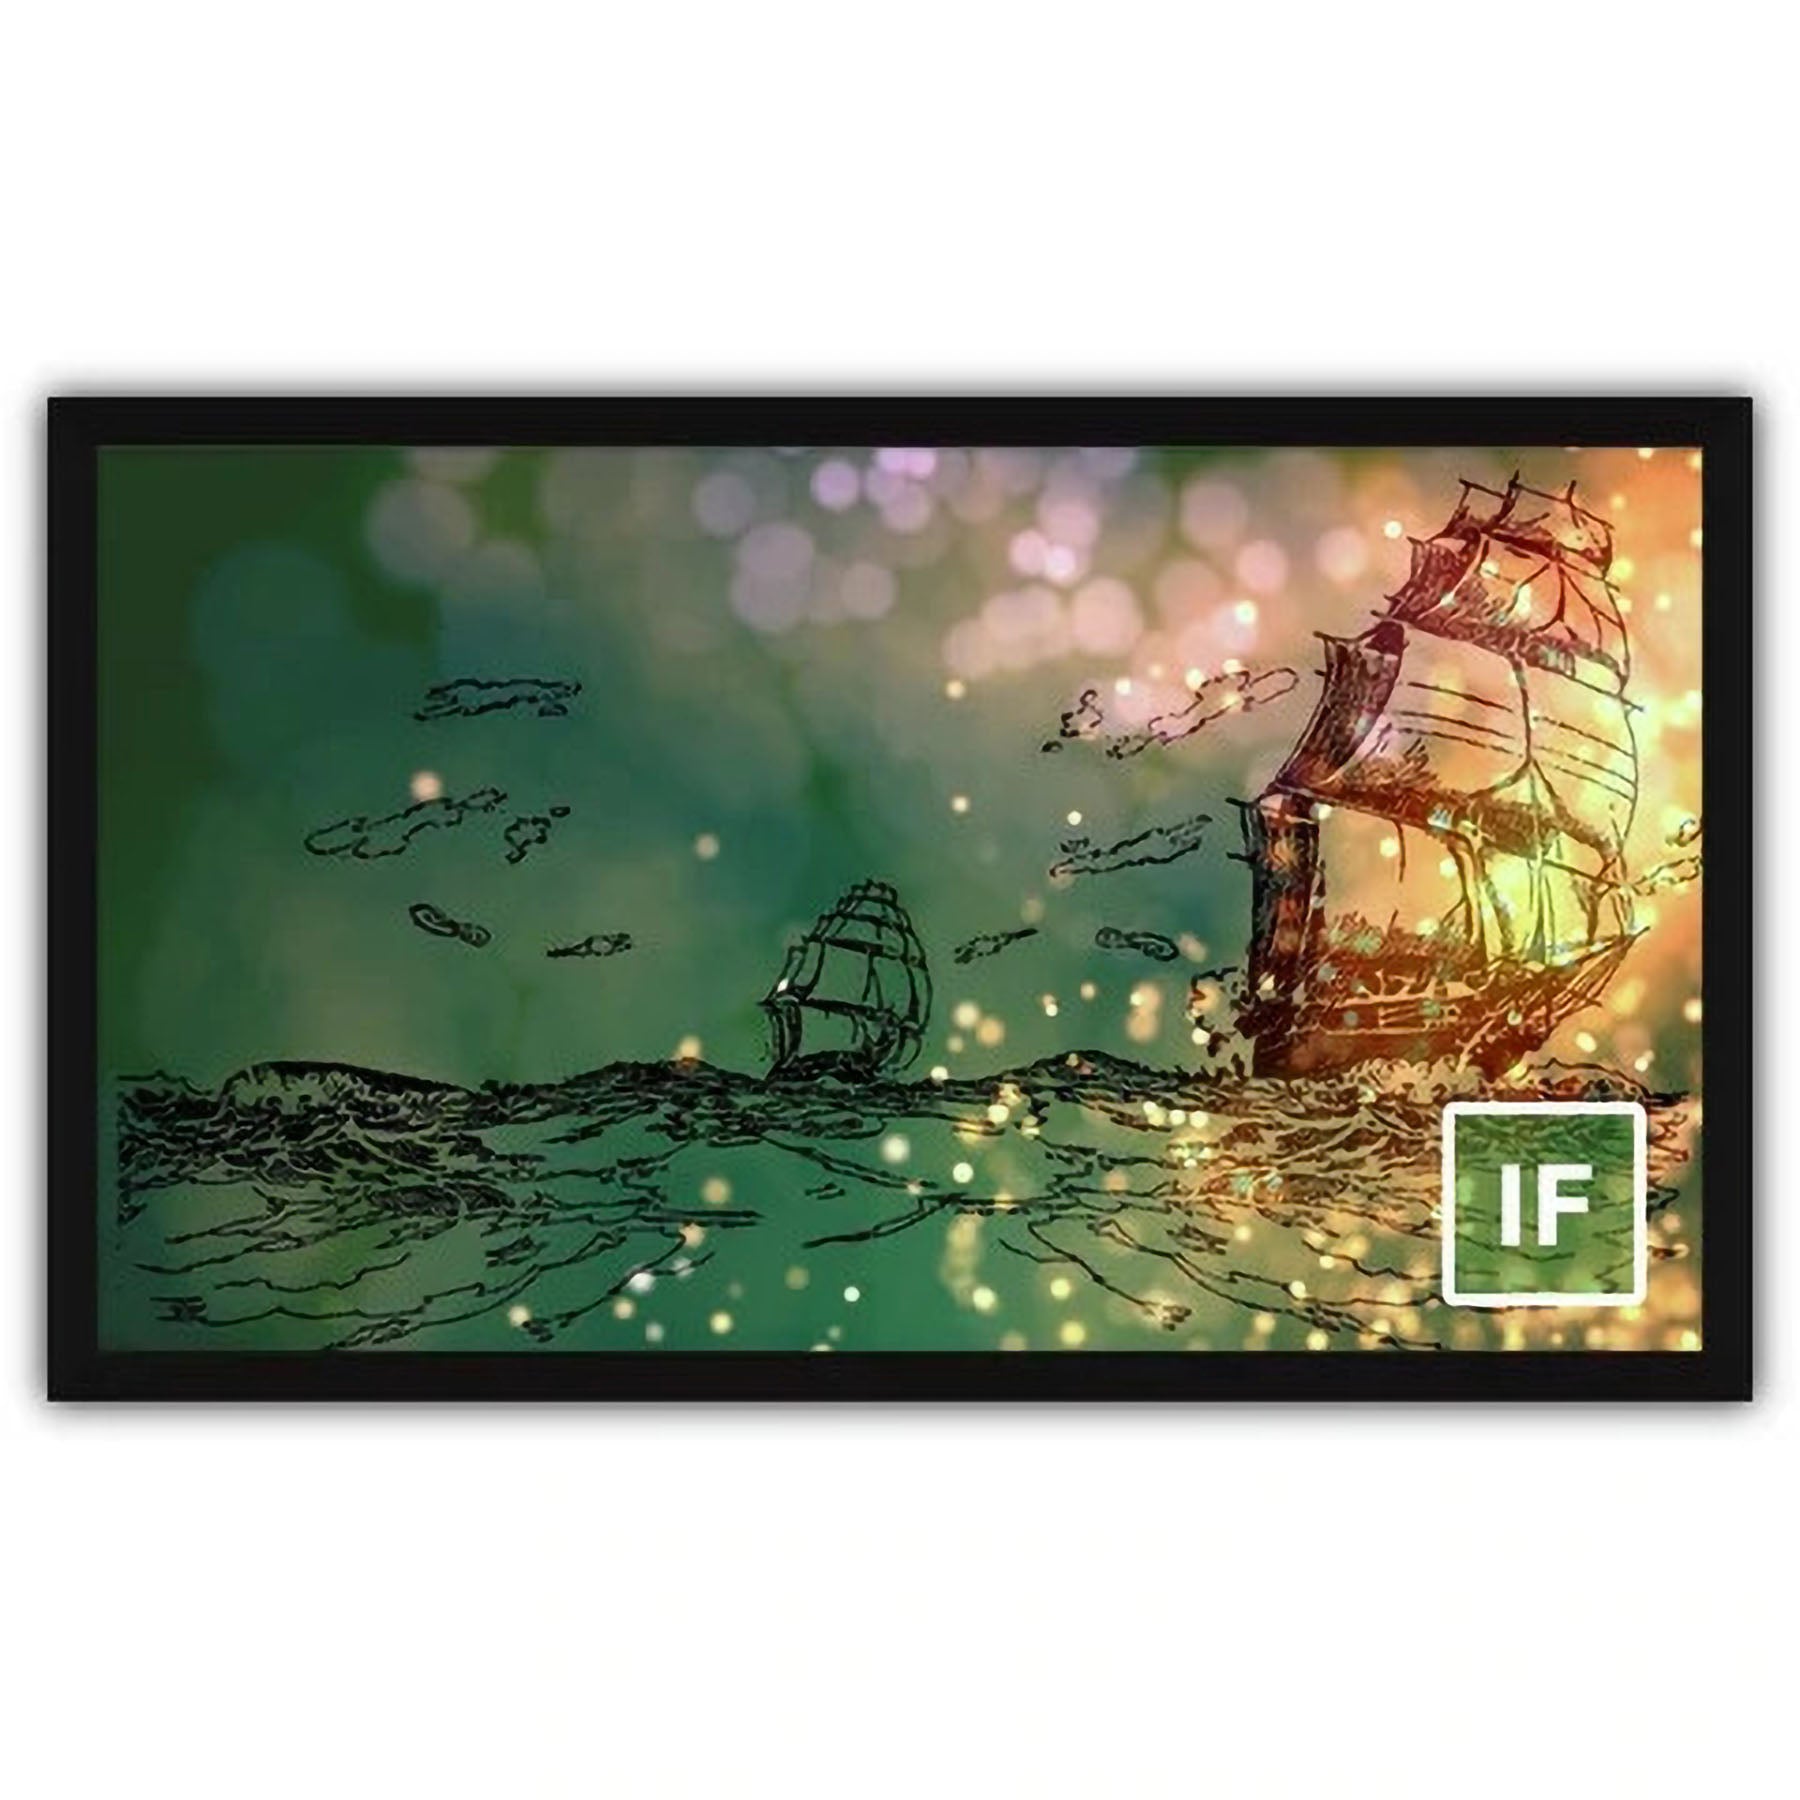 Severtson Screens Impression Series 16:9 165-inch Fixed Frame Projection Screen